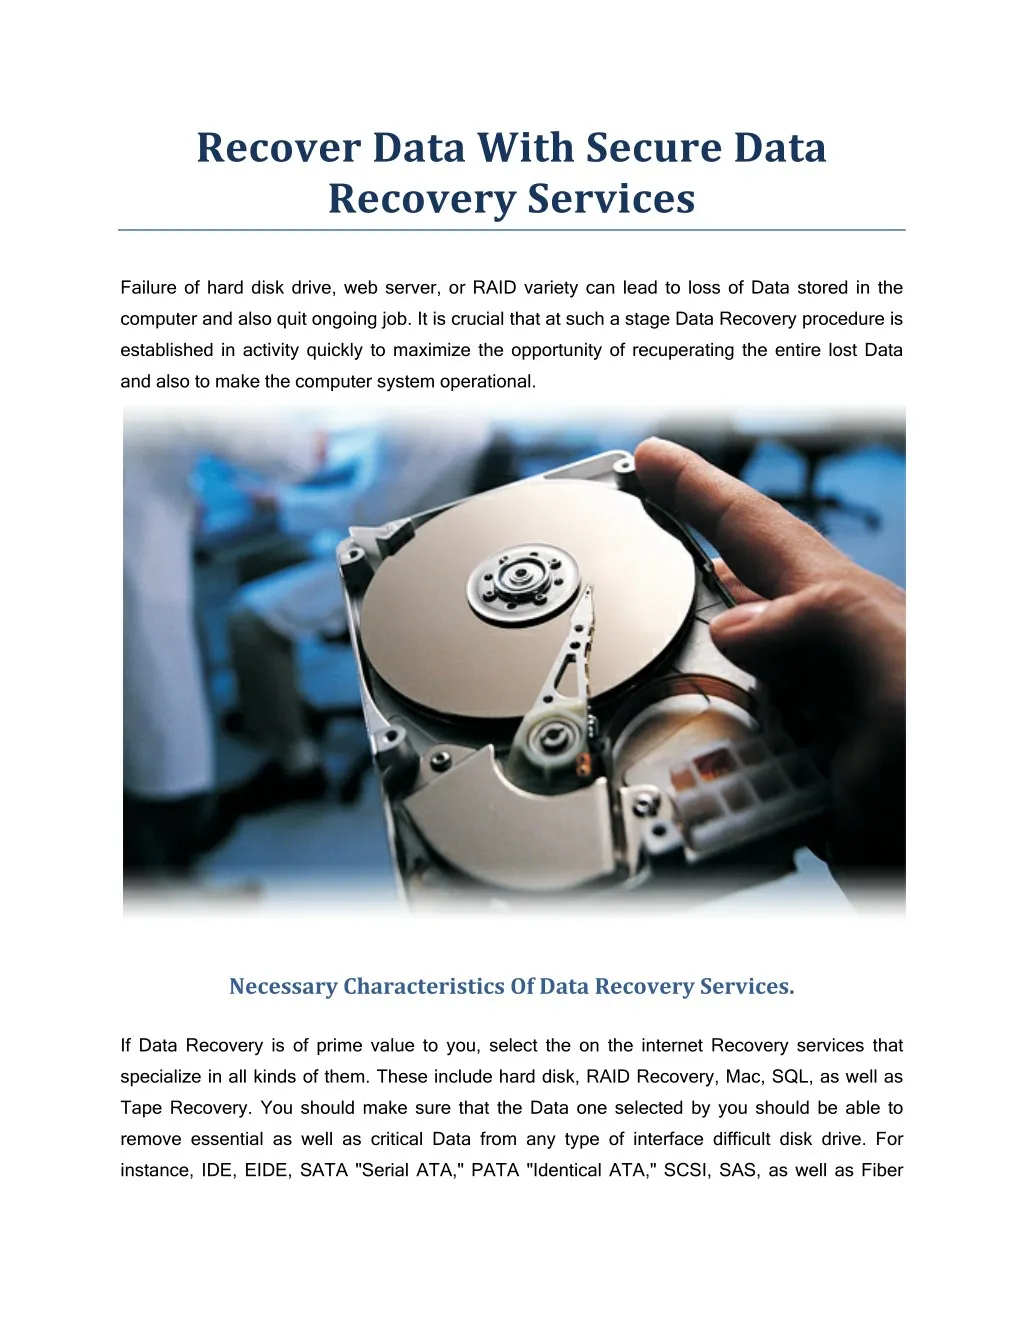 secure data recovery services